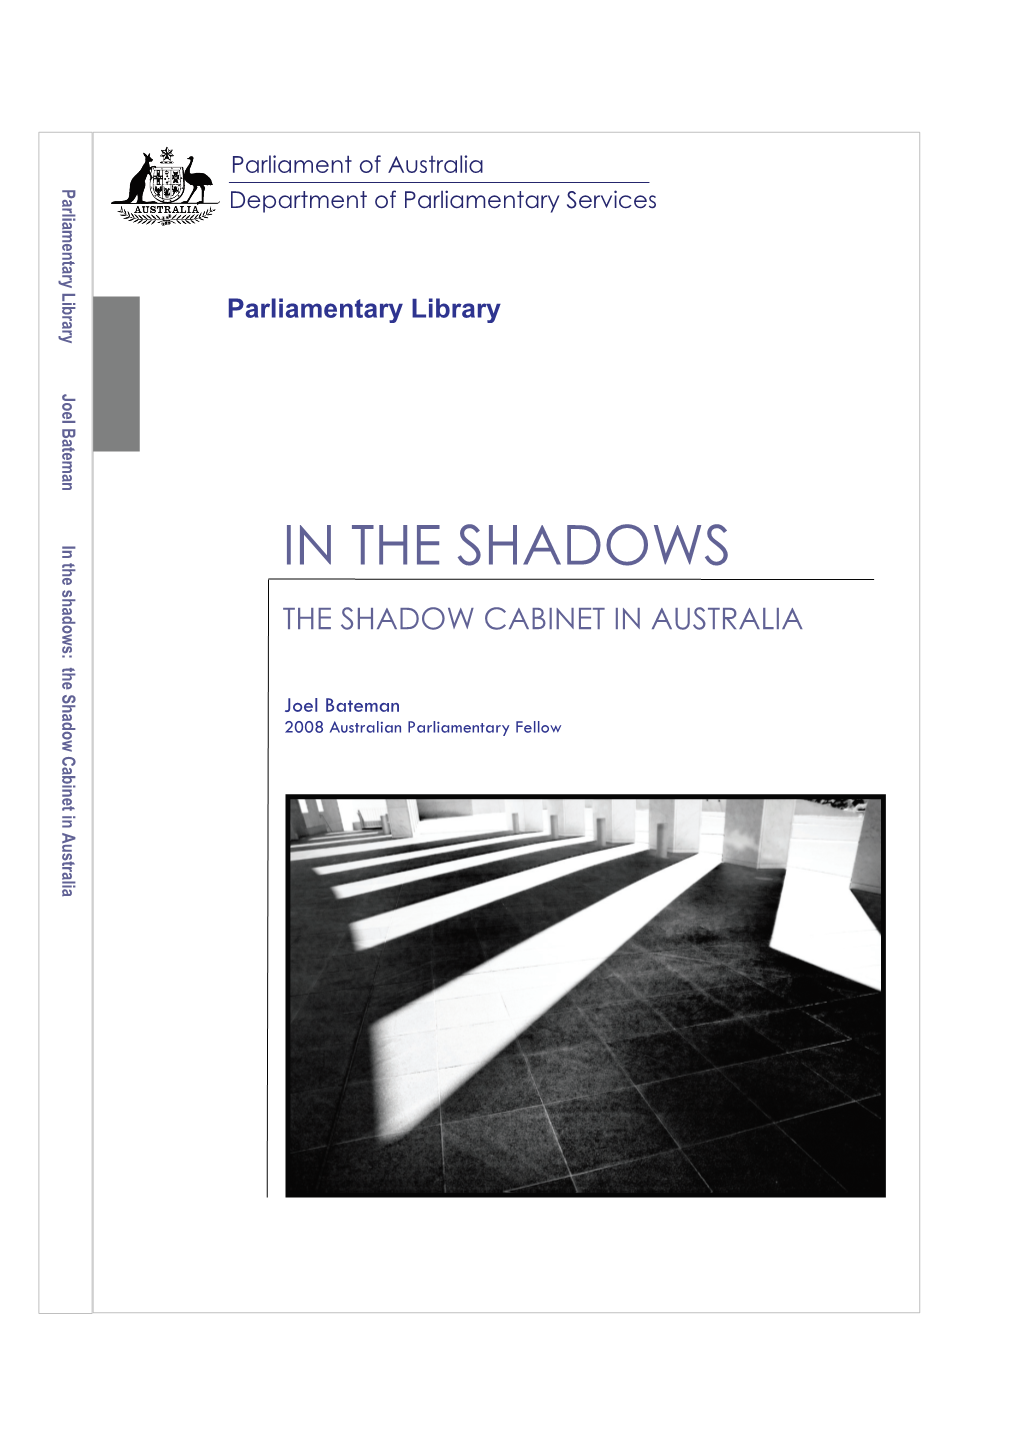 In the Shadows: the Shadow Cabinet in Australia in the SHADOWS